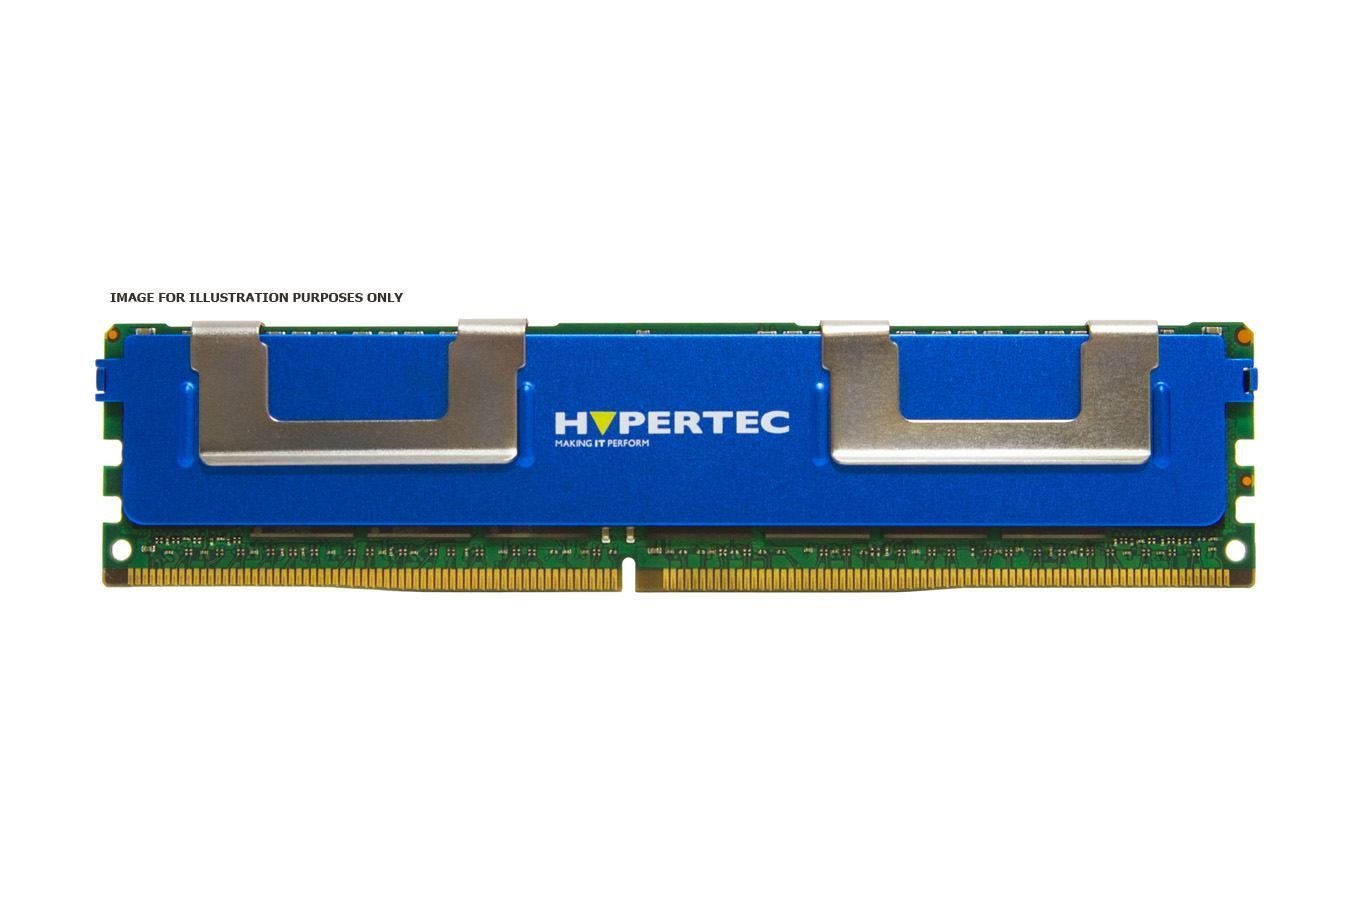 Hypertec Hymhpbk1uxl Memory Module 8 GB DDR3 1600 MHz (A HP Equivalent 8 GB DDR3 Sdram 1600 MHz [ PC3-12800 ]Legacy Note: This Memory Meets The Memory Specification Requirements For Reliable Operation